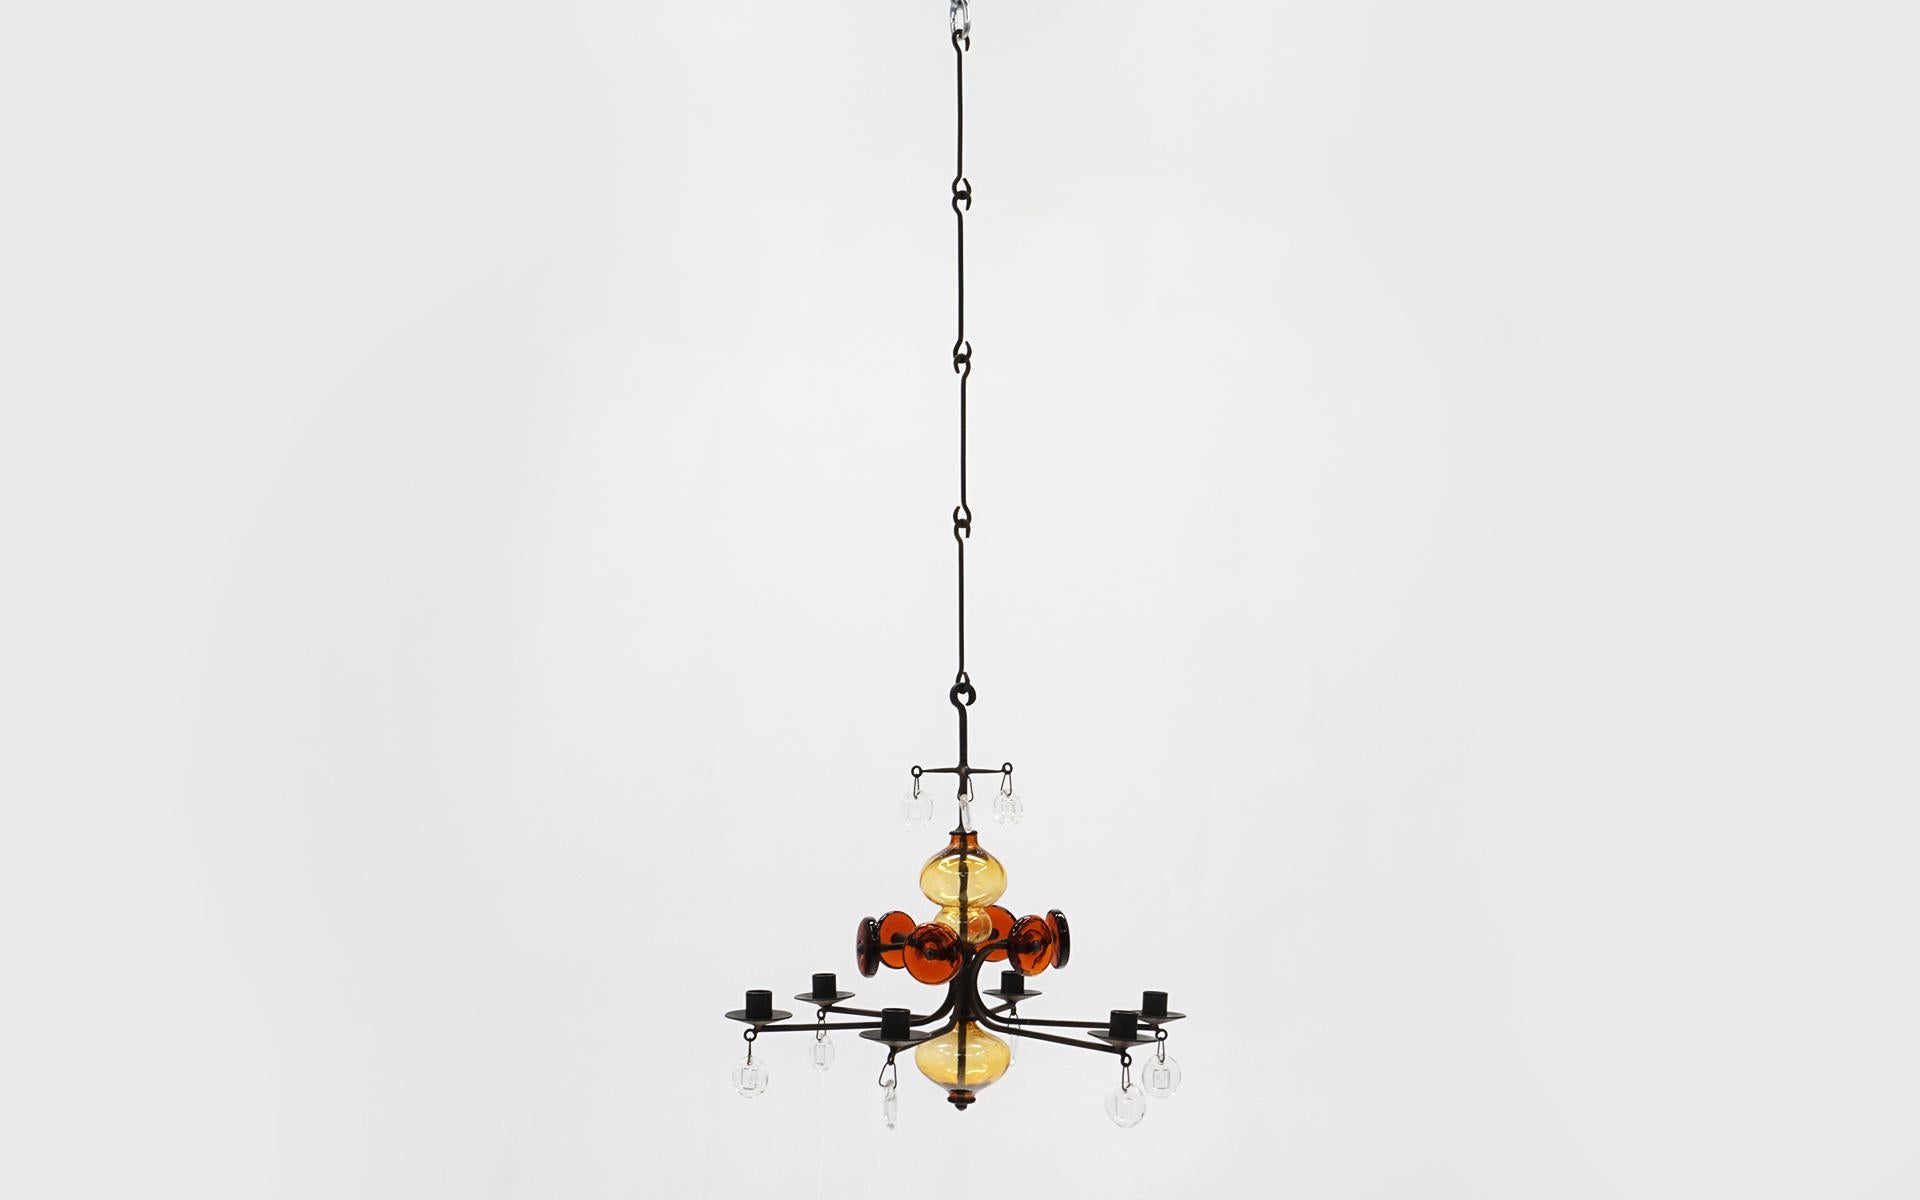 Erik / Eric Hoglund hanging candelabra / candelabrum / pendent / chandelier. Blown glass and wrought iron. Includes four original drop down extensions. This is an excellent example of this design. Great colors in amber, orange, and clear glass.